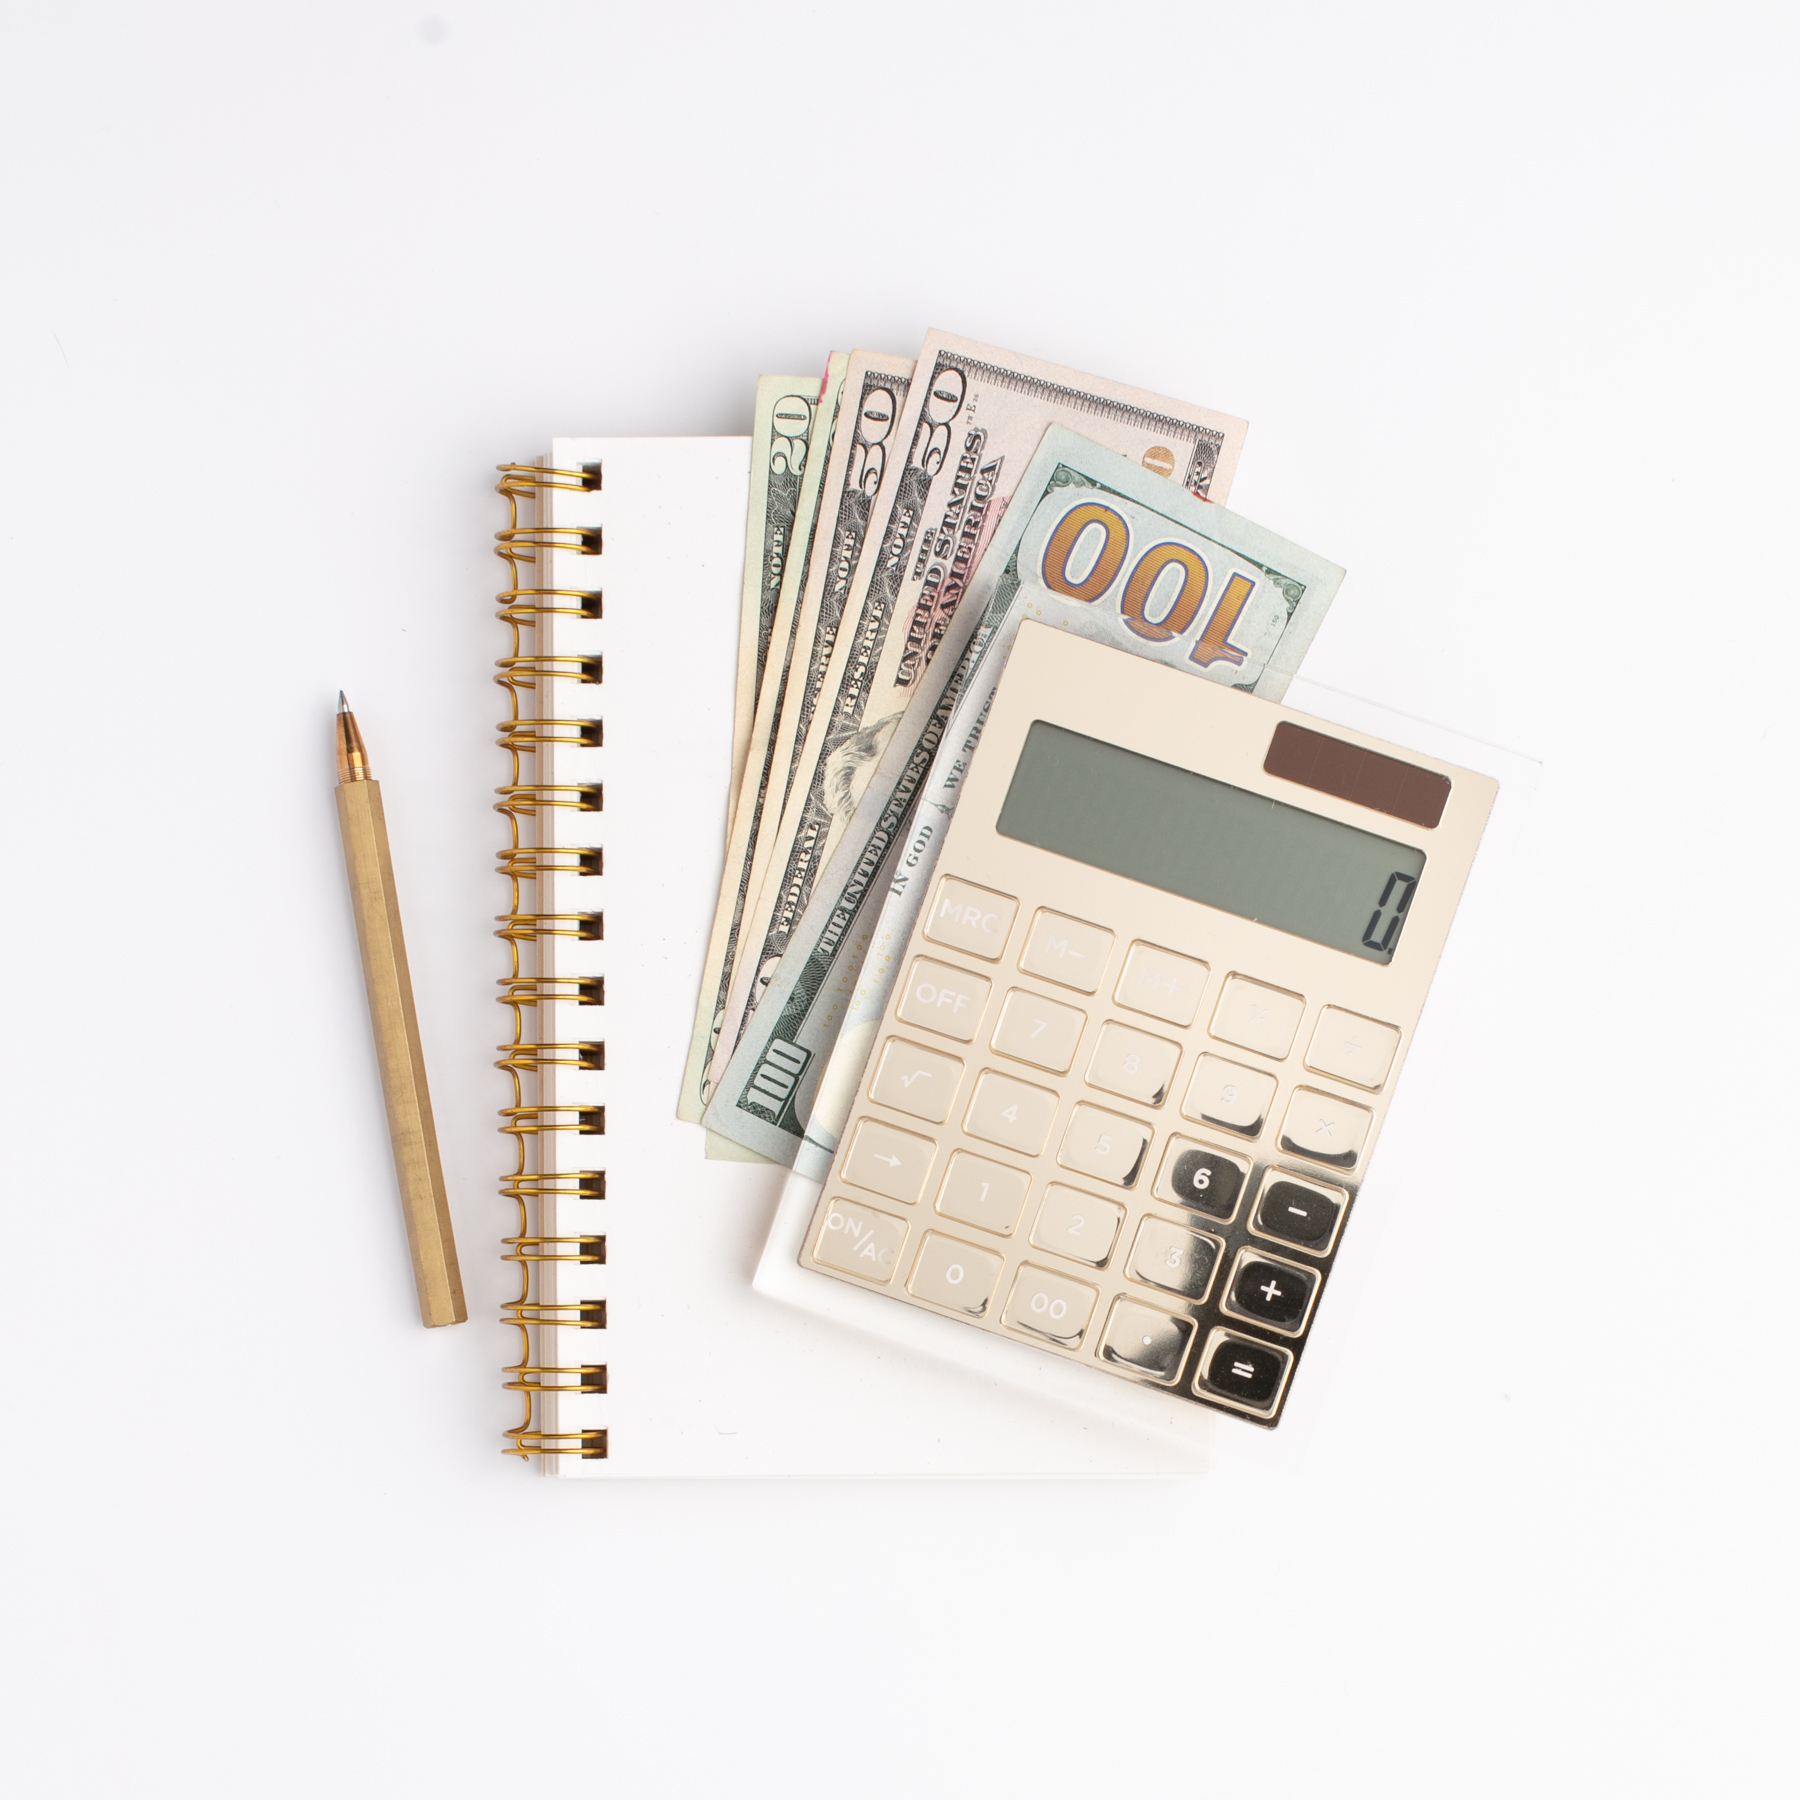 gold calculator on top of a stack of cash and notebook with a pencil on a white background